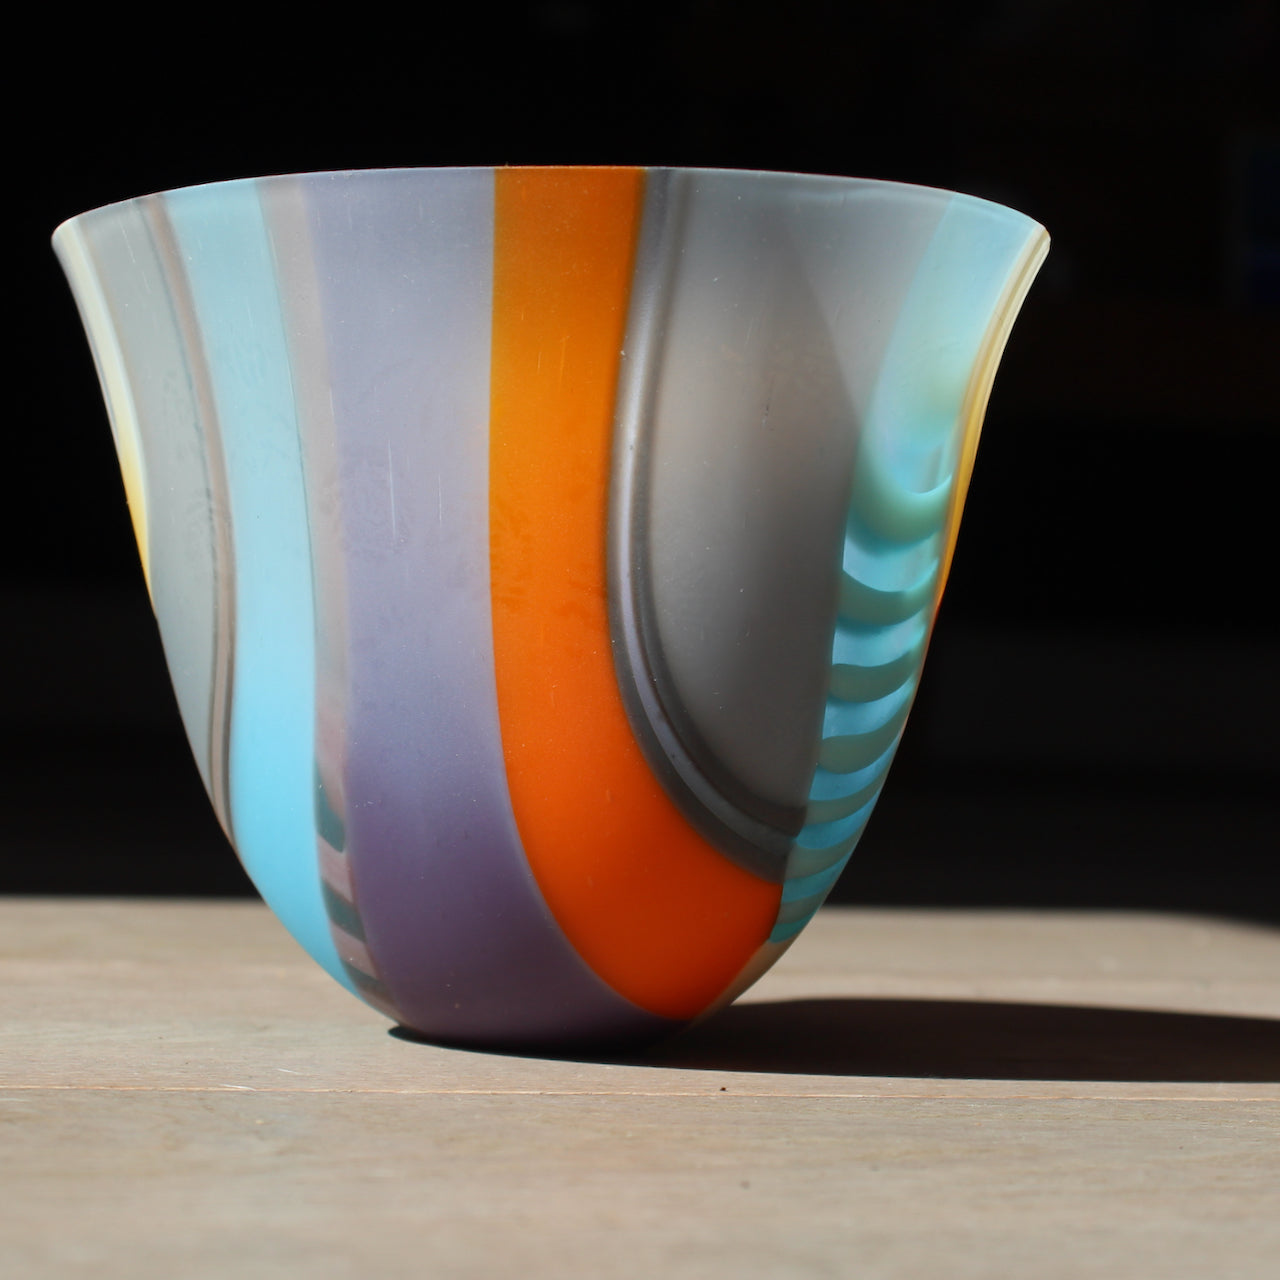 Round shaped bowl in vibrant tones of blue, orange, grey, pink by glass artist Ruth Shelley.